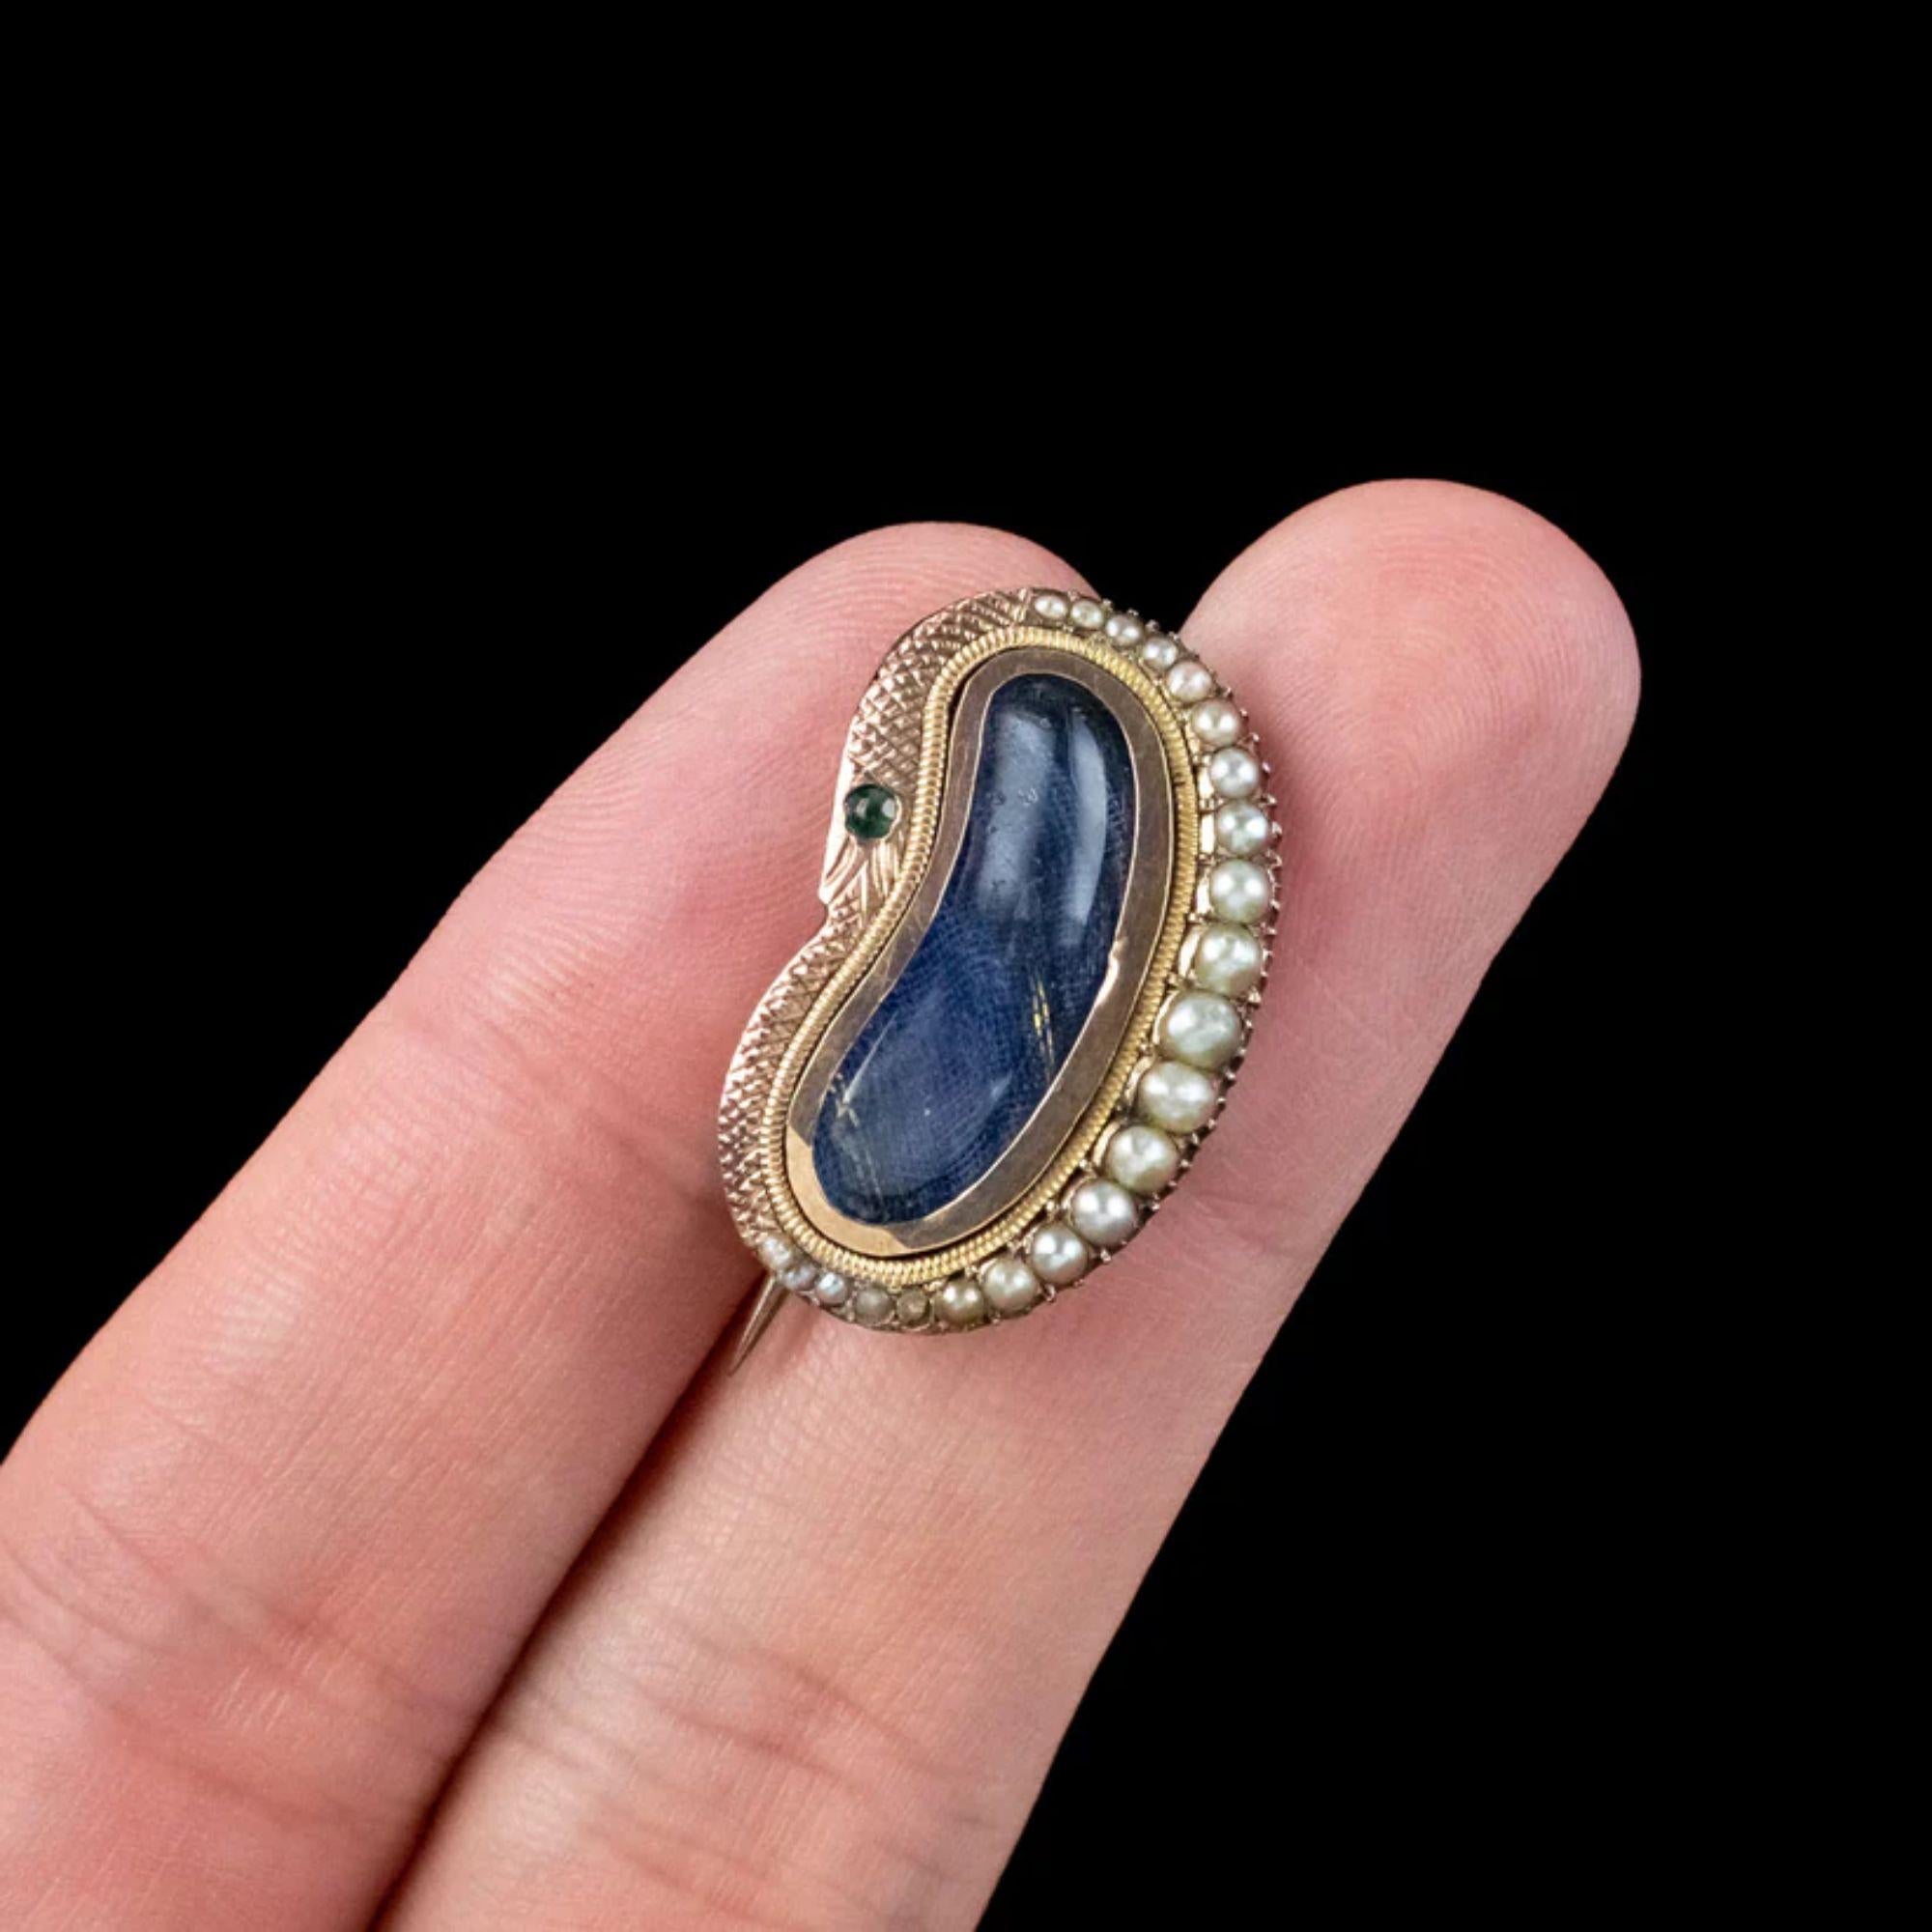 Bead Antique Georgian Mourning Pearl Snake Brooch with Window, circa 1800 – 1830 For Sale